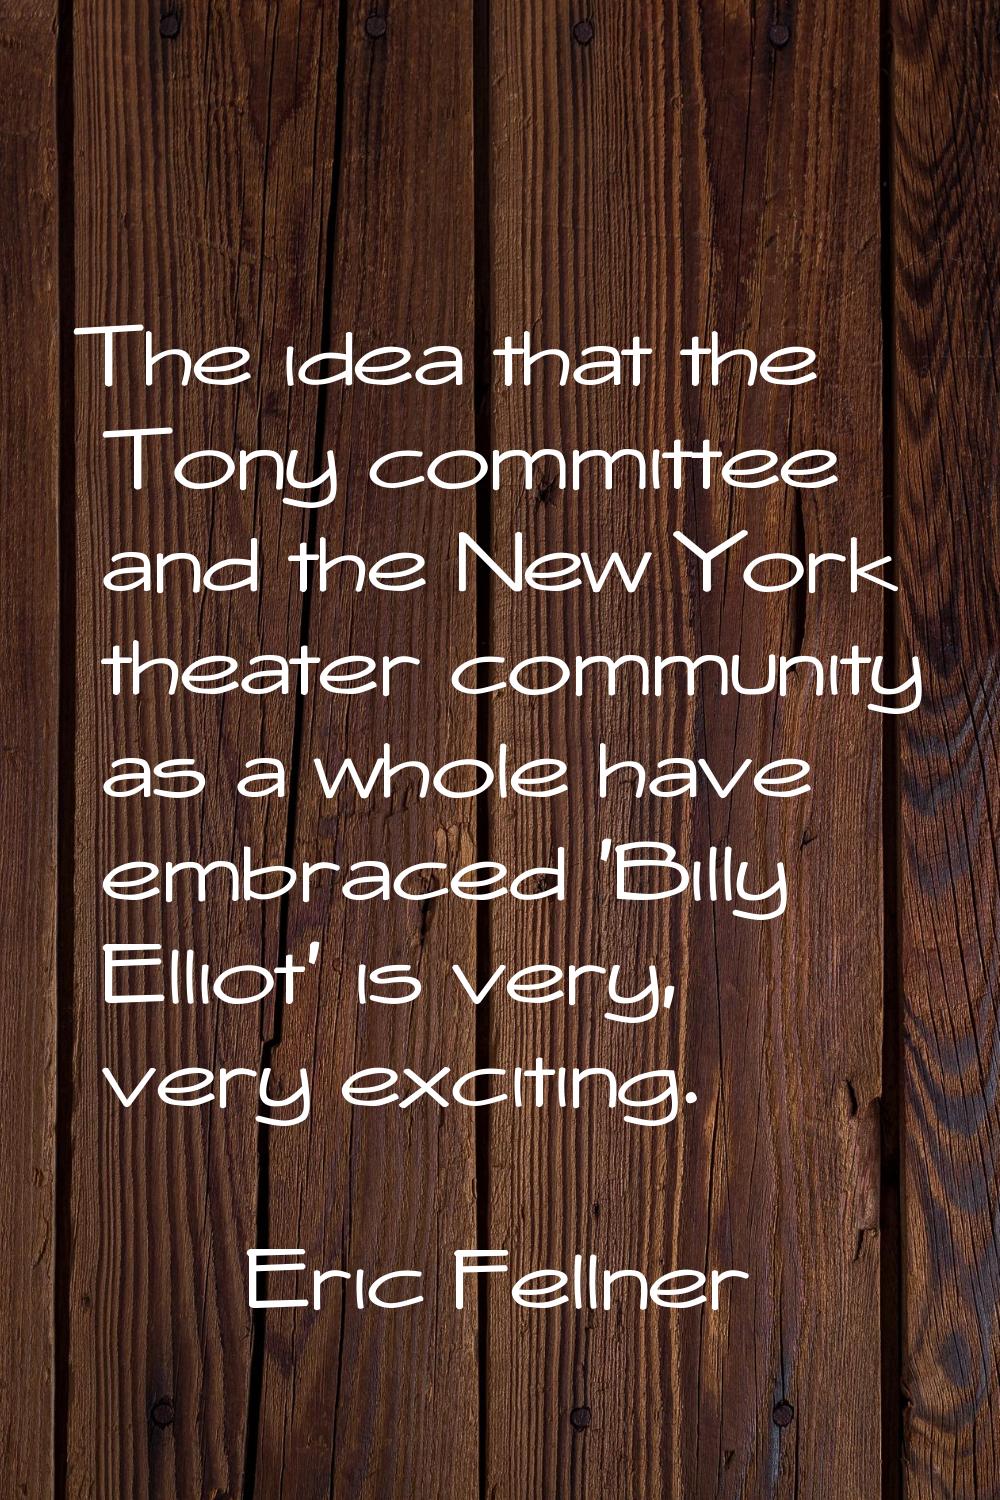 The idea that the Tony committee and the New York theater community as a whole have embraced 'Billy